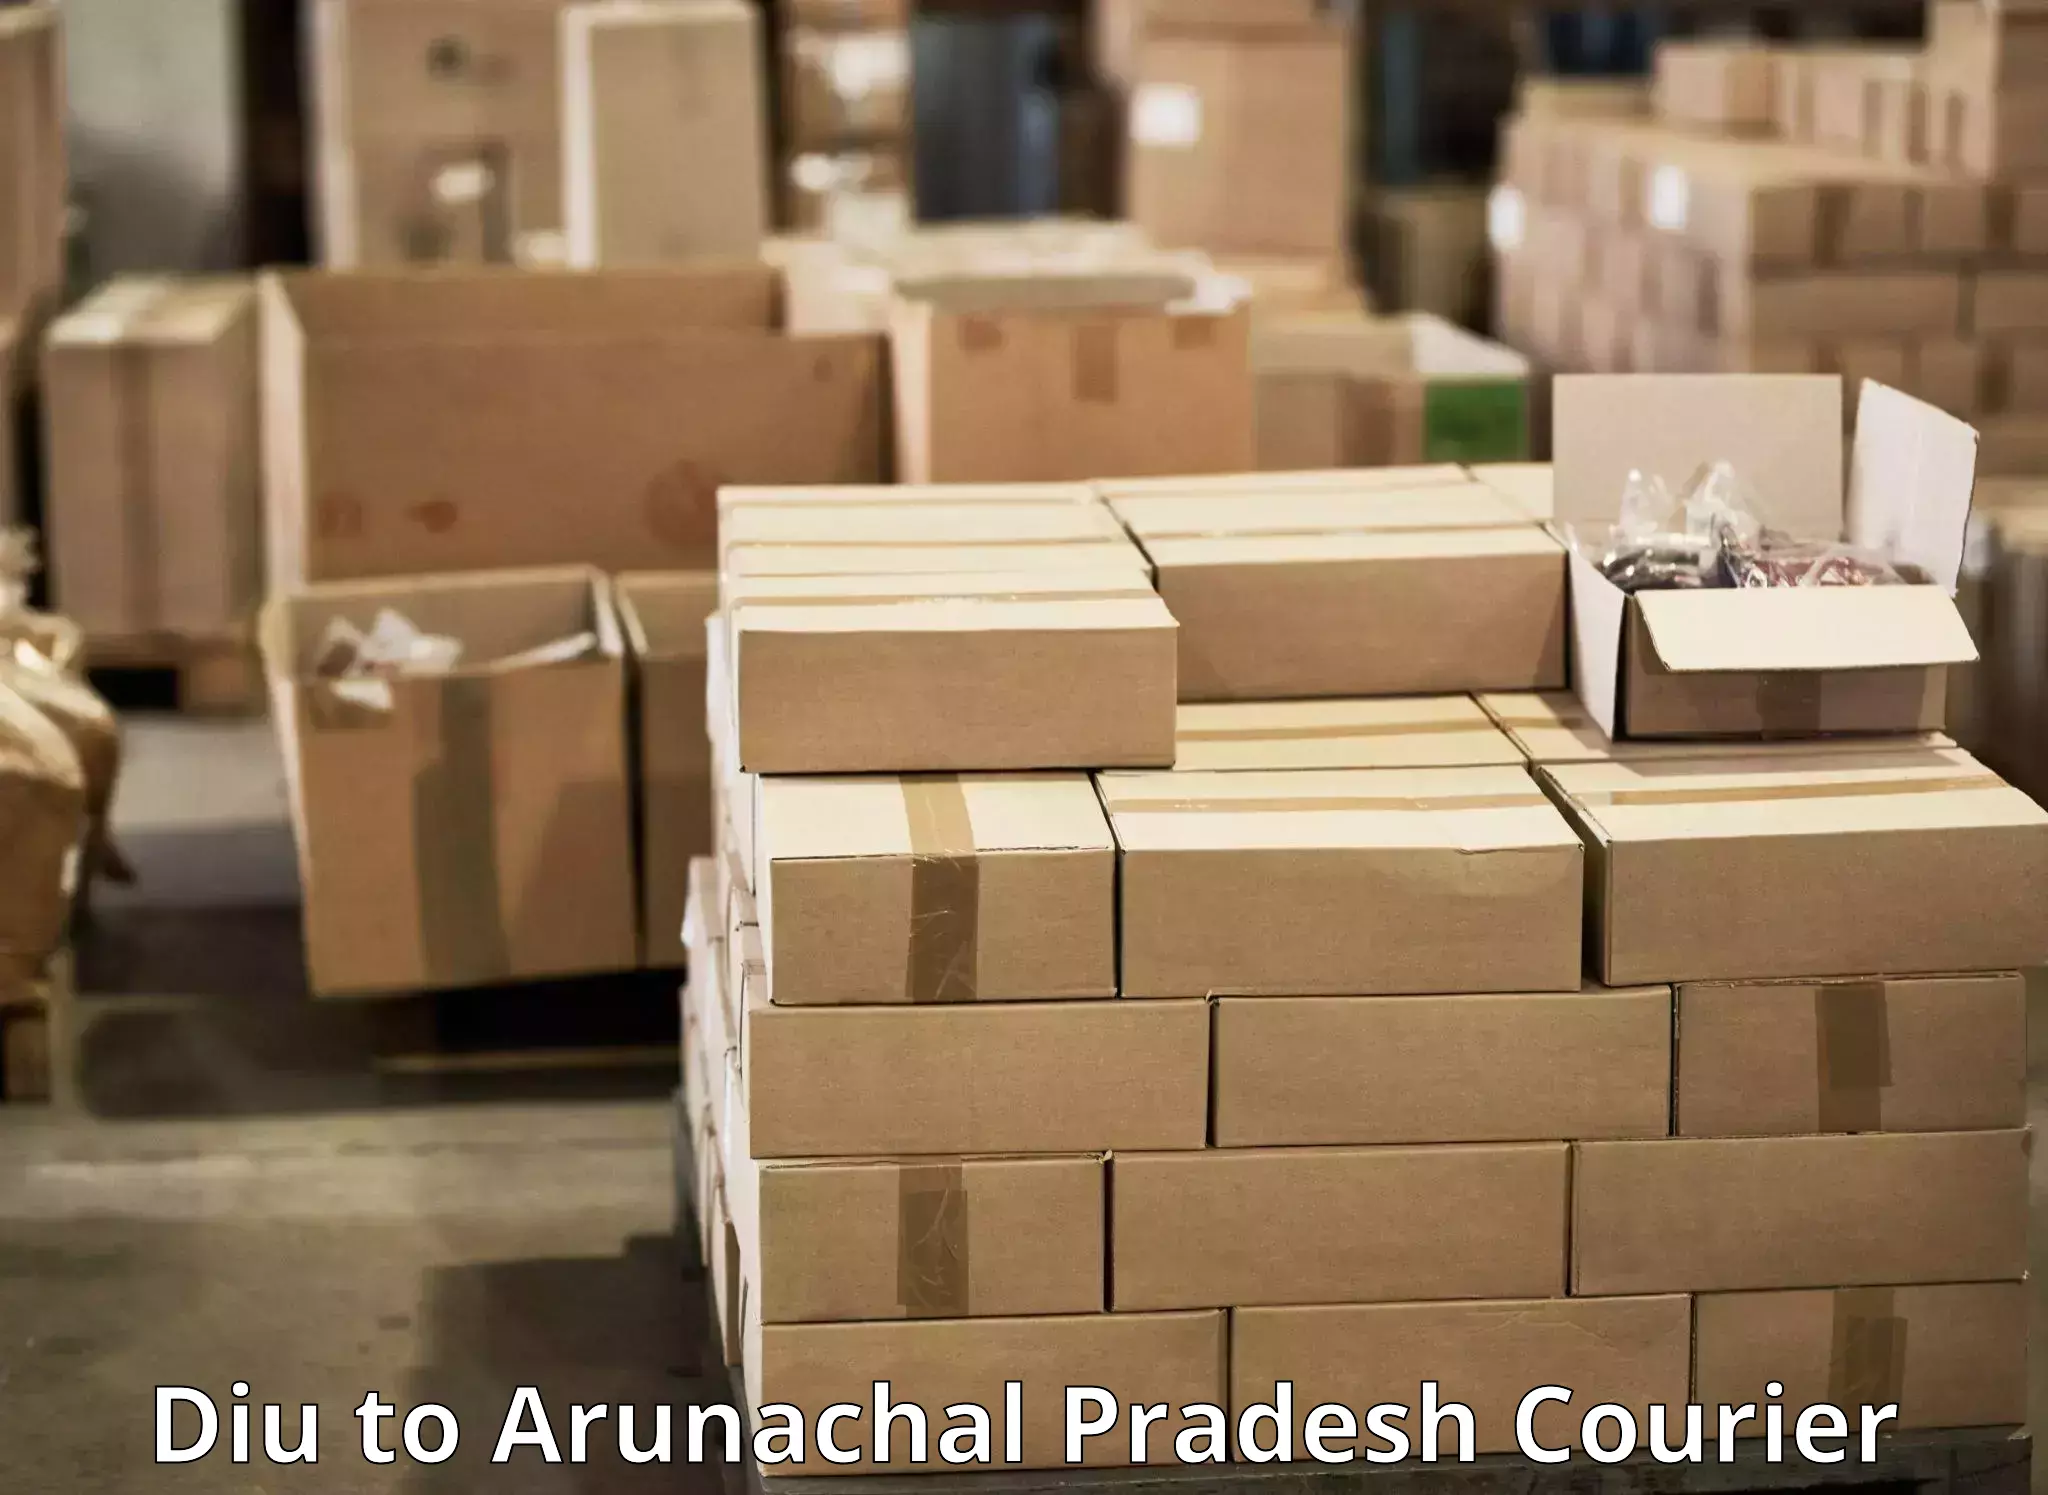 Courier app Diu to Deomali